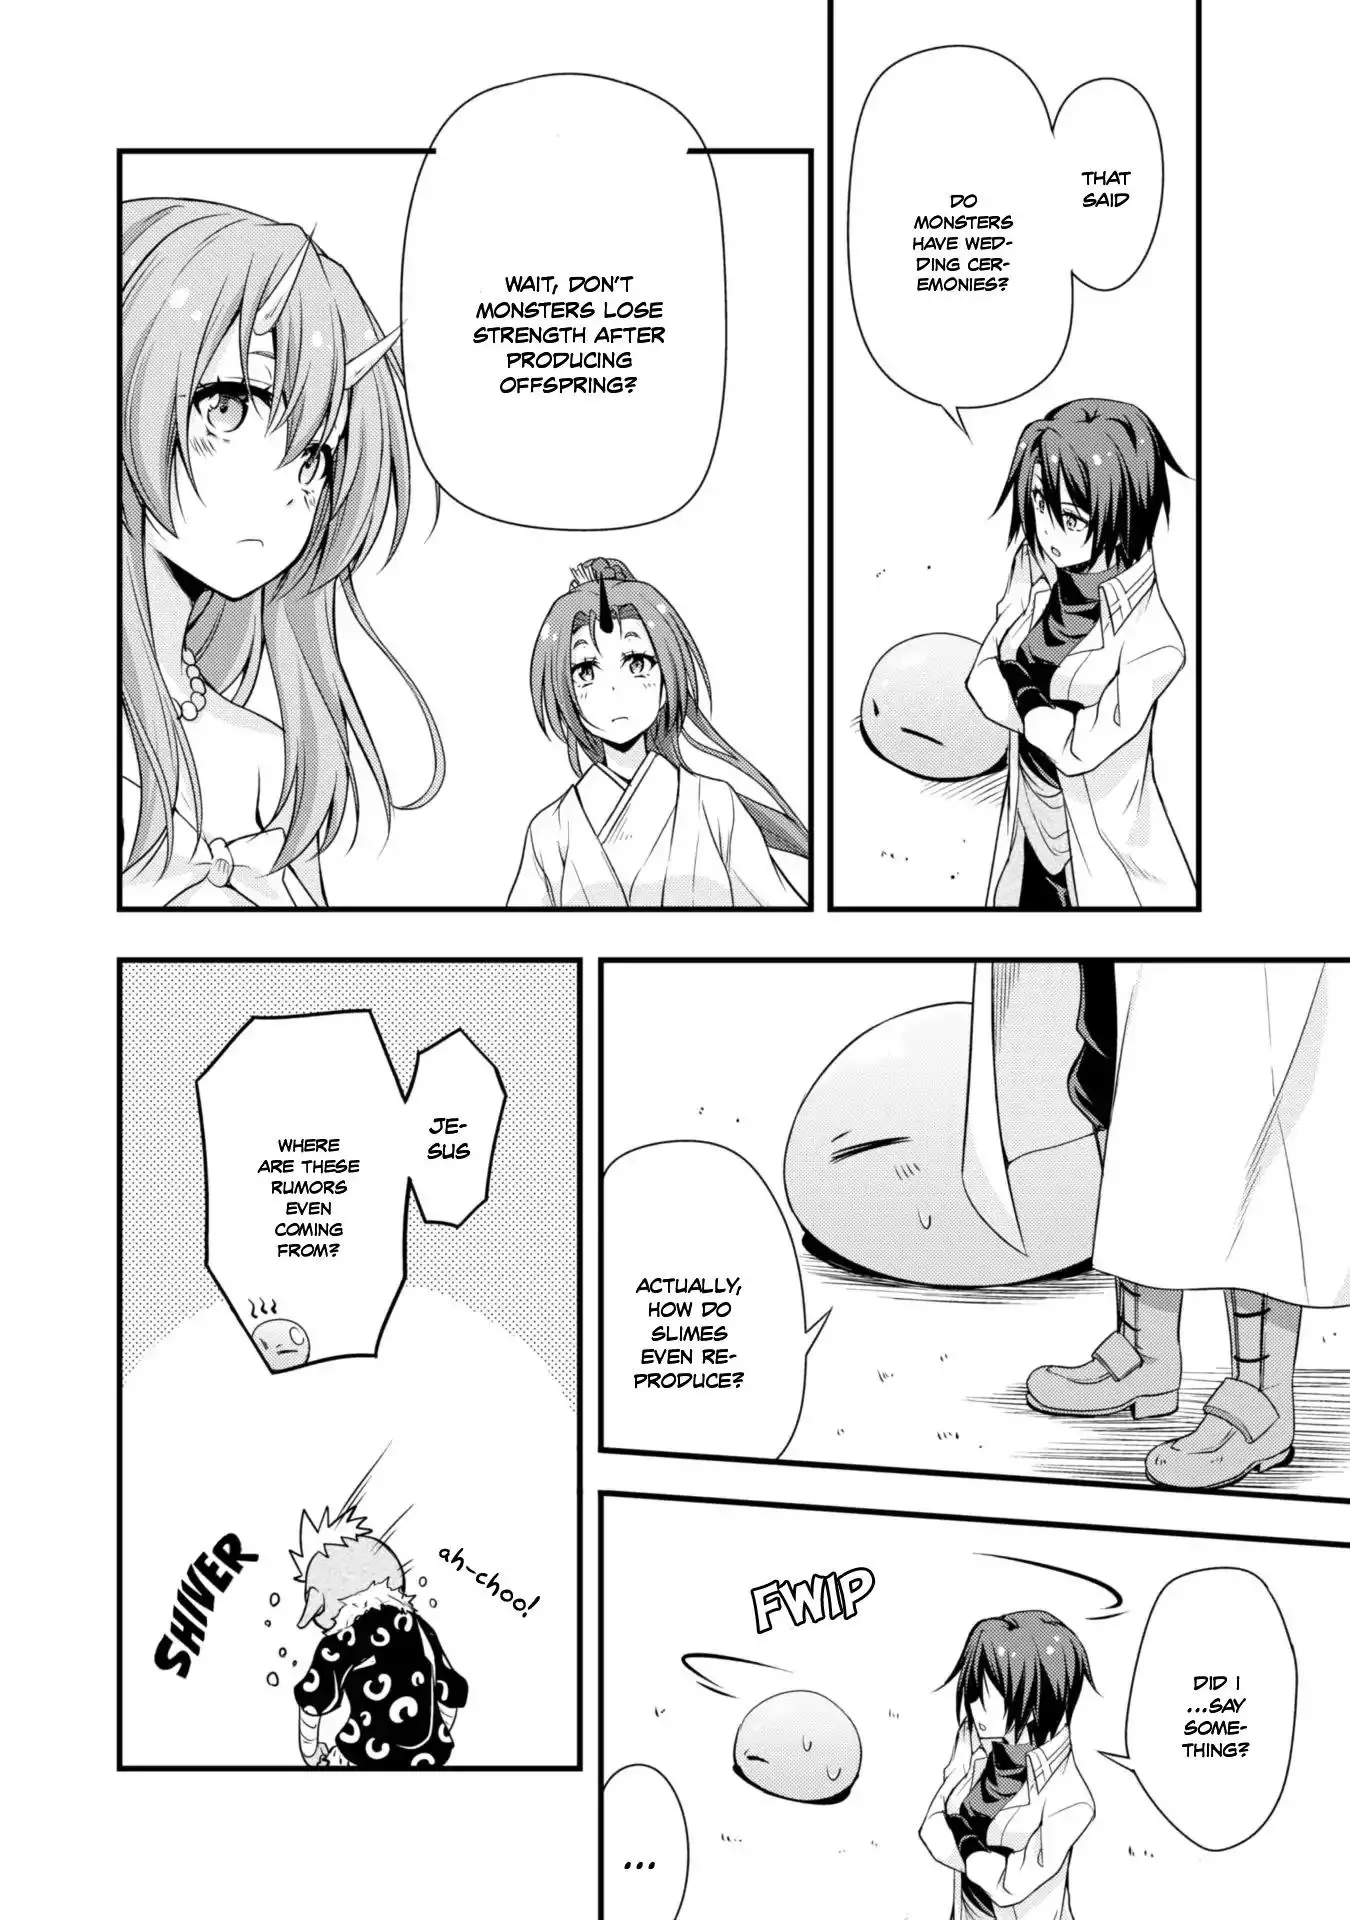 Tensei Shitara Slime Datta Ken: The Ways of Strolling in the Demon Country - 13 page 13